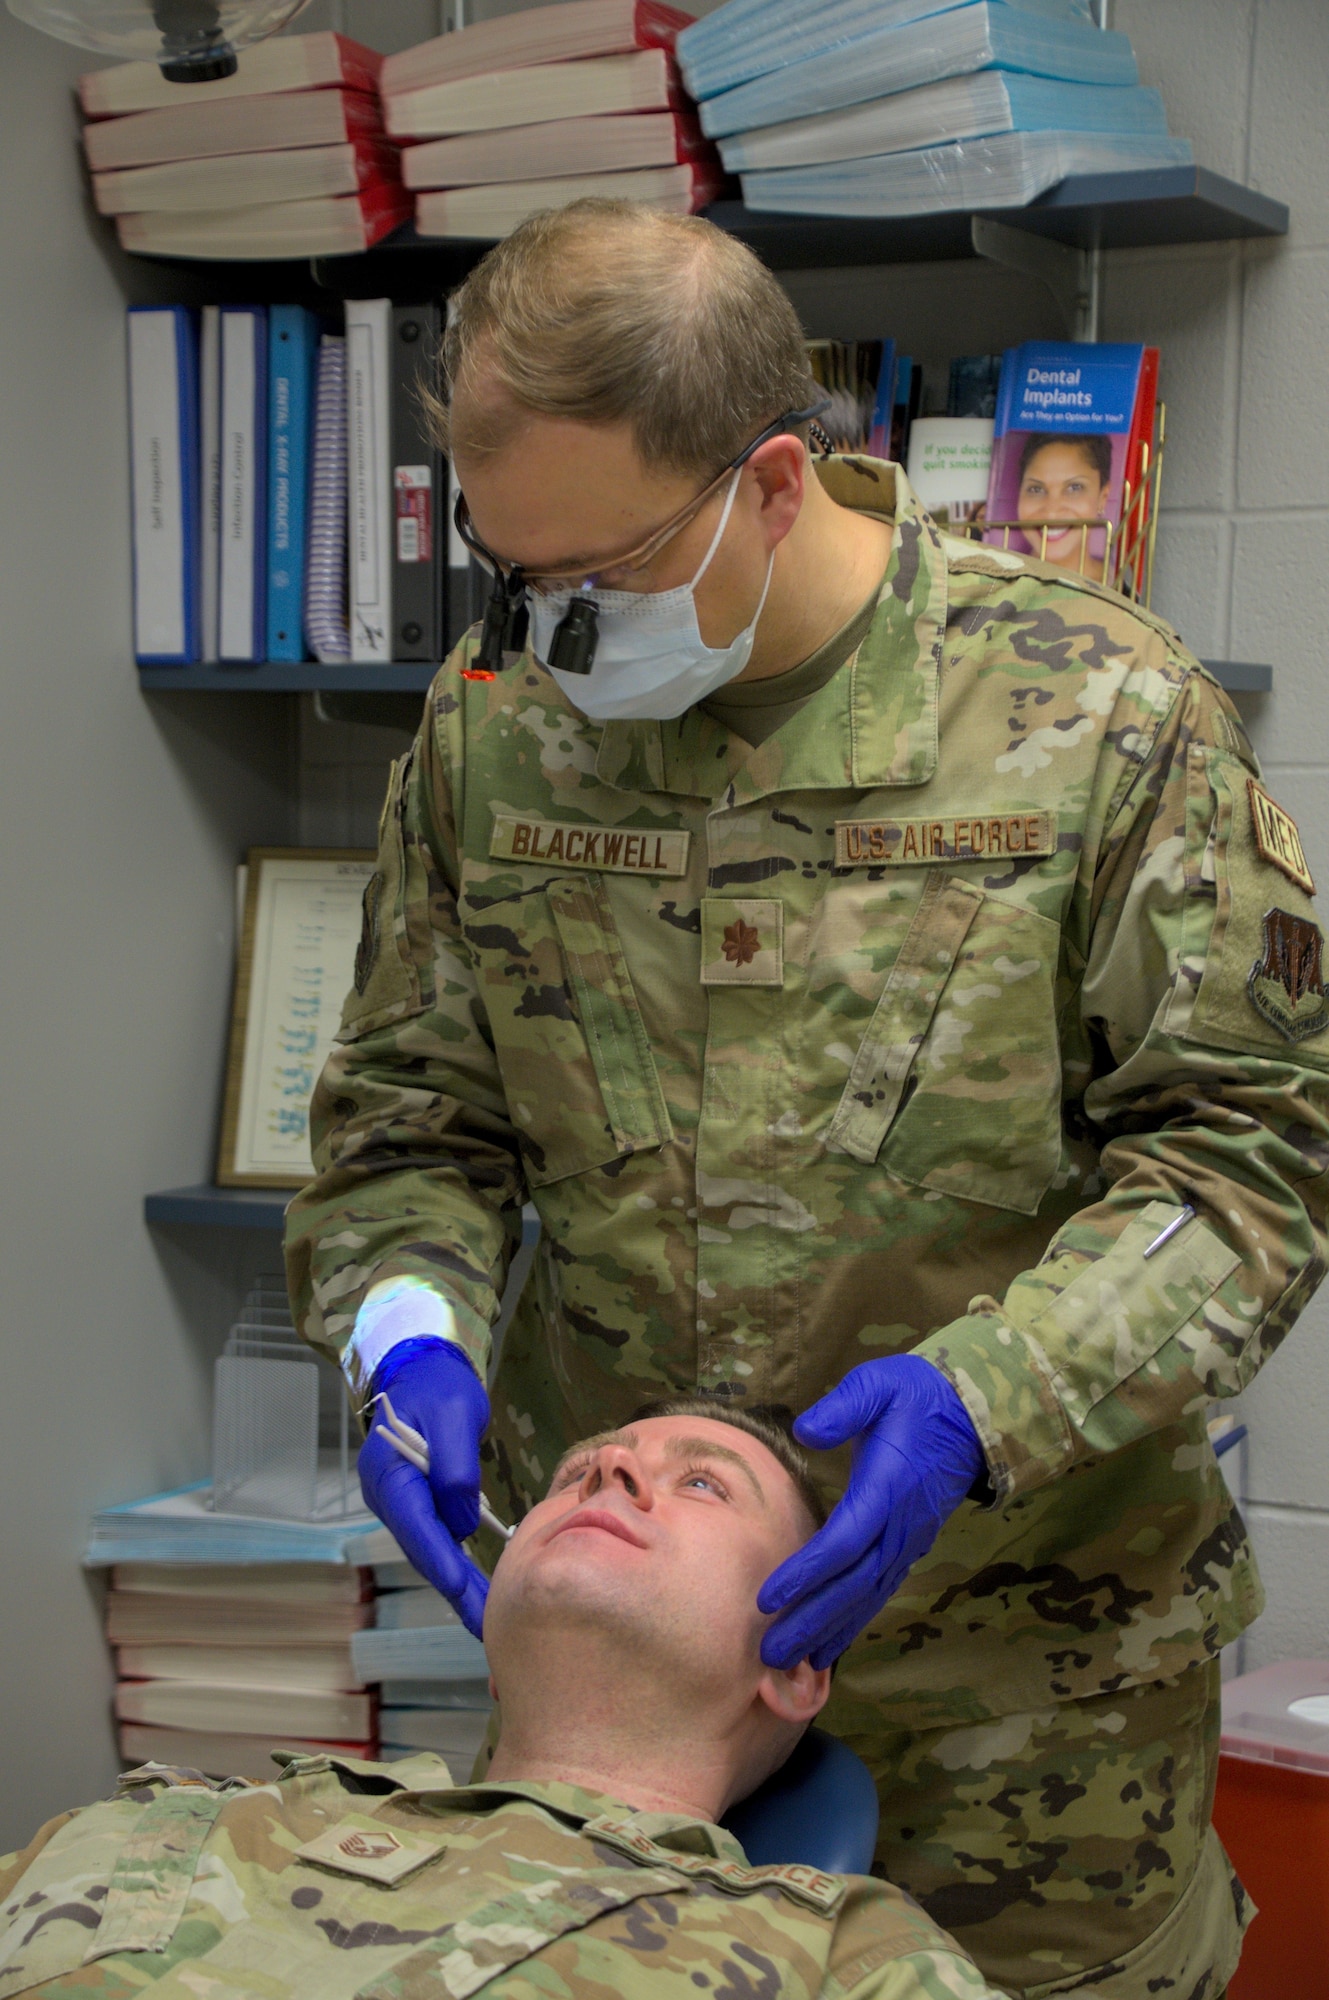 U.S. Air Force Maj. Andrew Blackwell, 104th Medical Group dental officer, conducts an exam on U.S. Air Force Master Sgt. Christopher Catyb, Mission Support Group training manager, during the annual Periodic Health Assessments, March 4, 2023, at Barnes Air National Guard Base, Mass. Dental exams ensure Airmen do not have dental or periodontal issues, such as cavities, which may put them at risk of becoming non-deployable or that may require further attention. (U.S. Air National Guard Photo by Staff Sgt. Sara Kolinski)